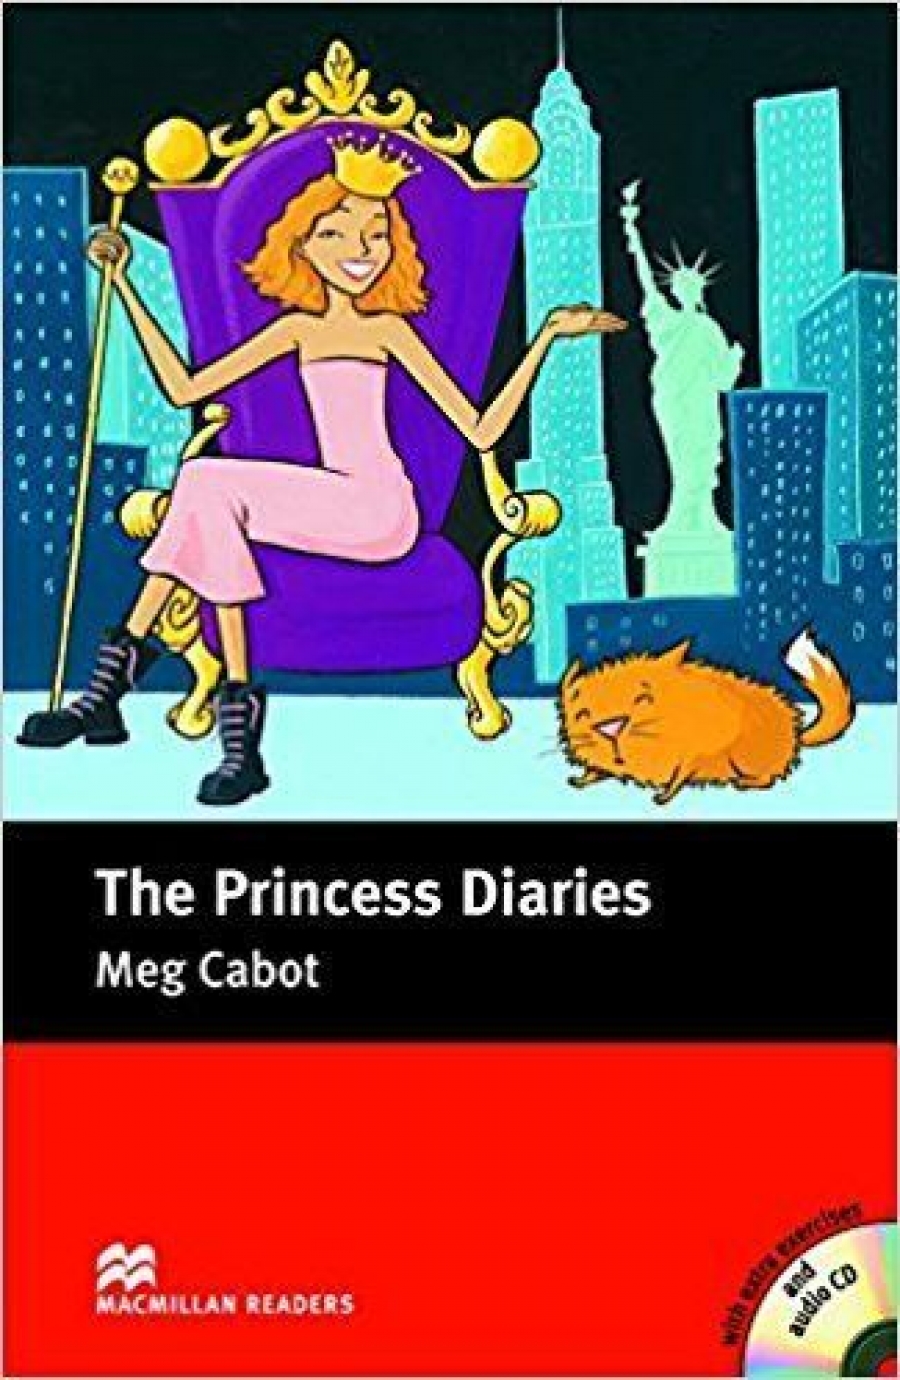 Meg Cabot, retold by Anne Collins The Princess Diaries: Book 1 (with Audio CD) 